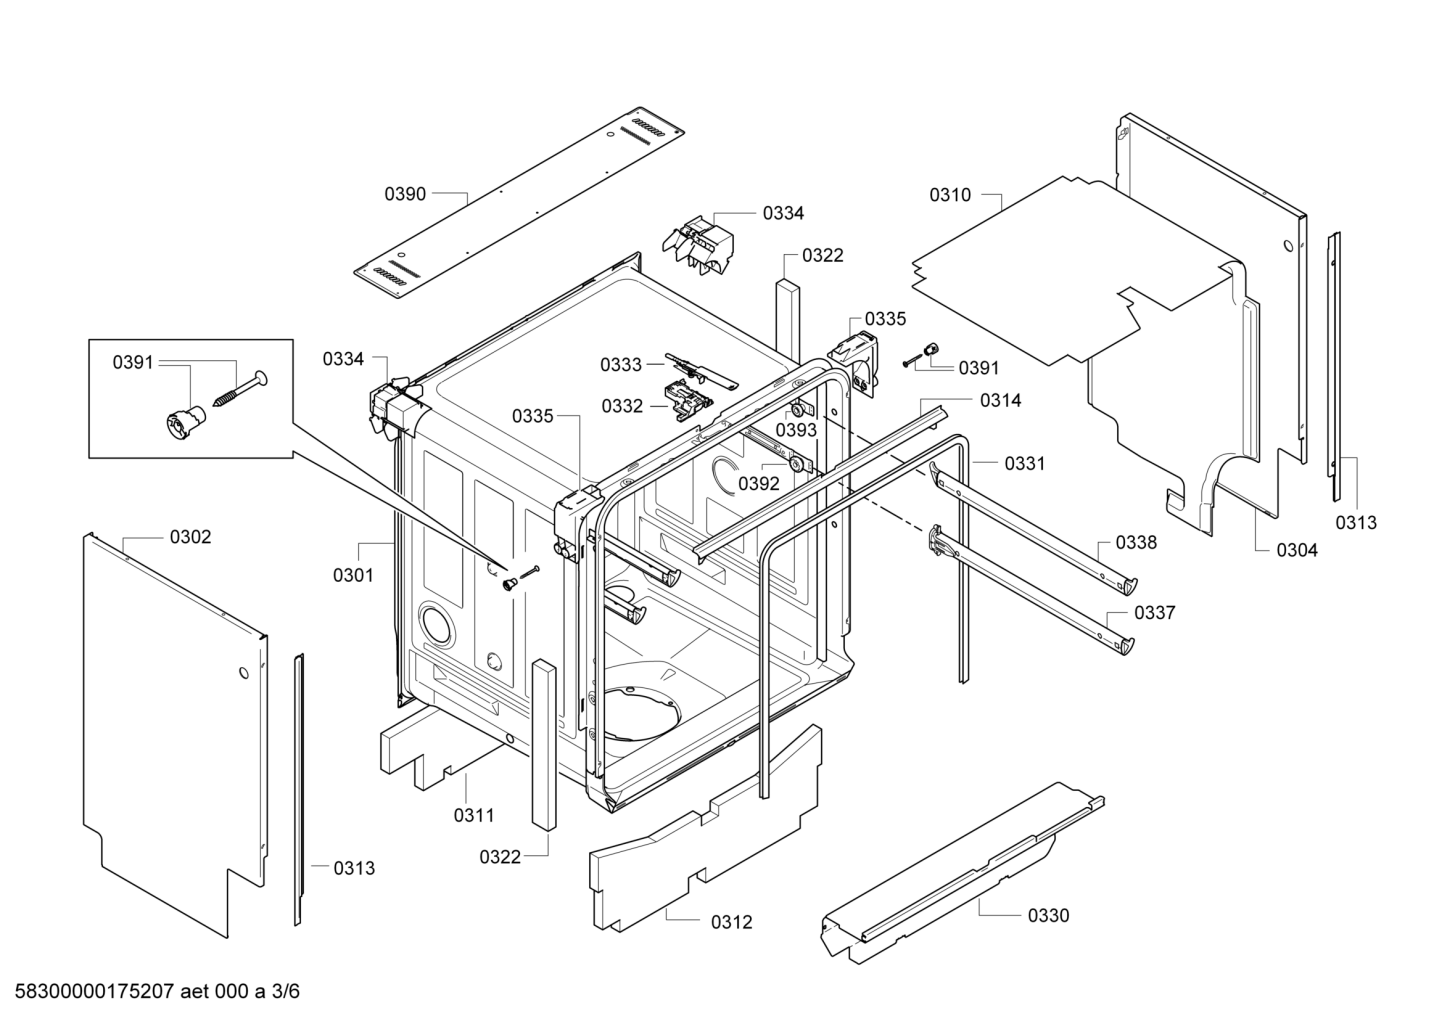 drawing_link_3_device_1651374